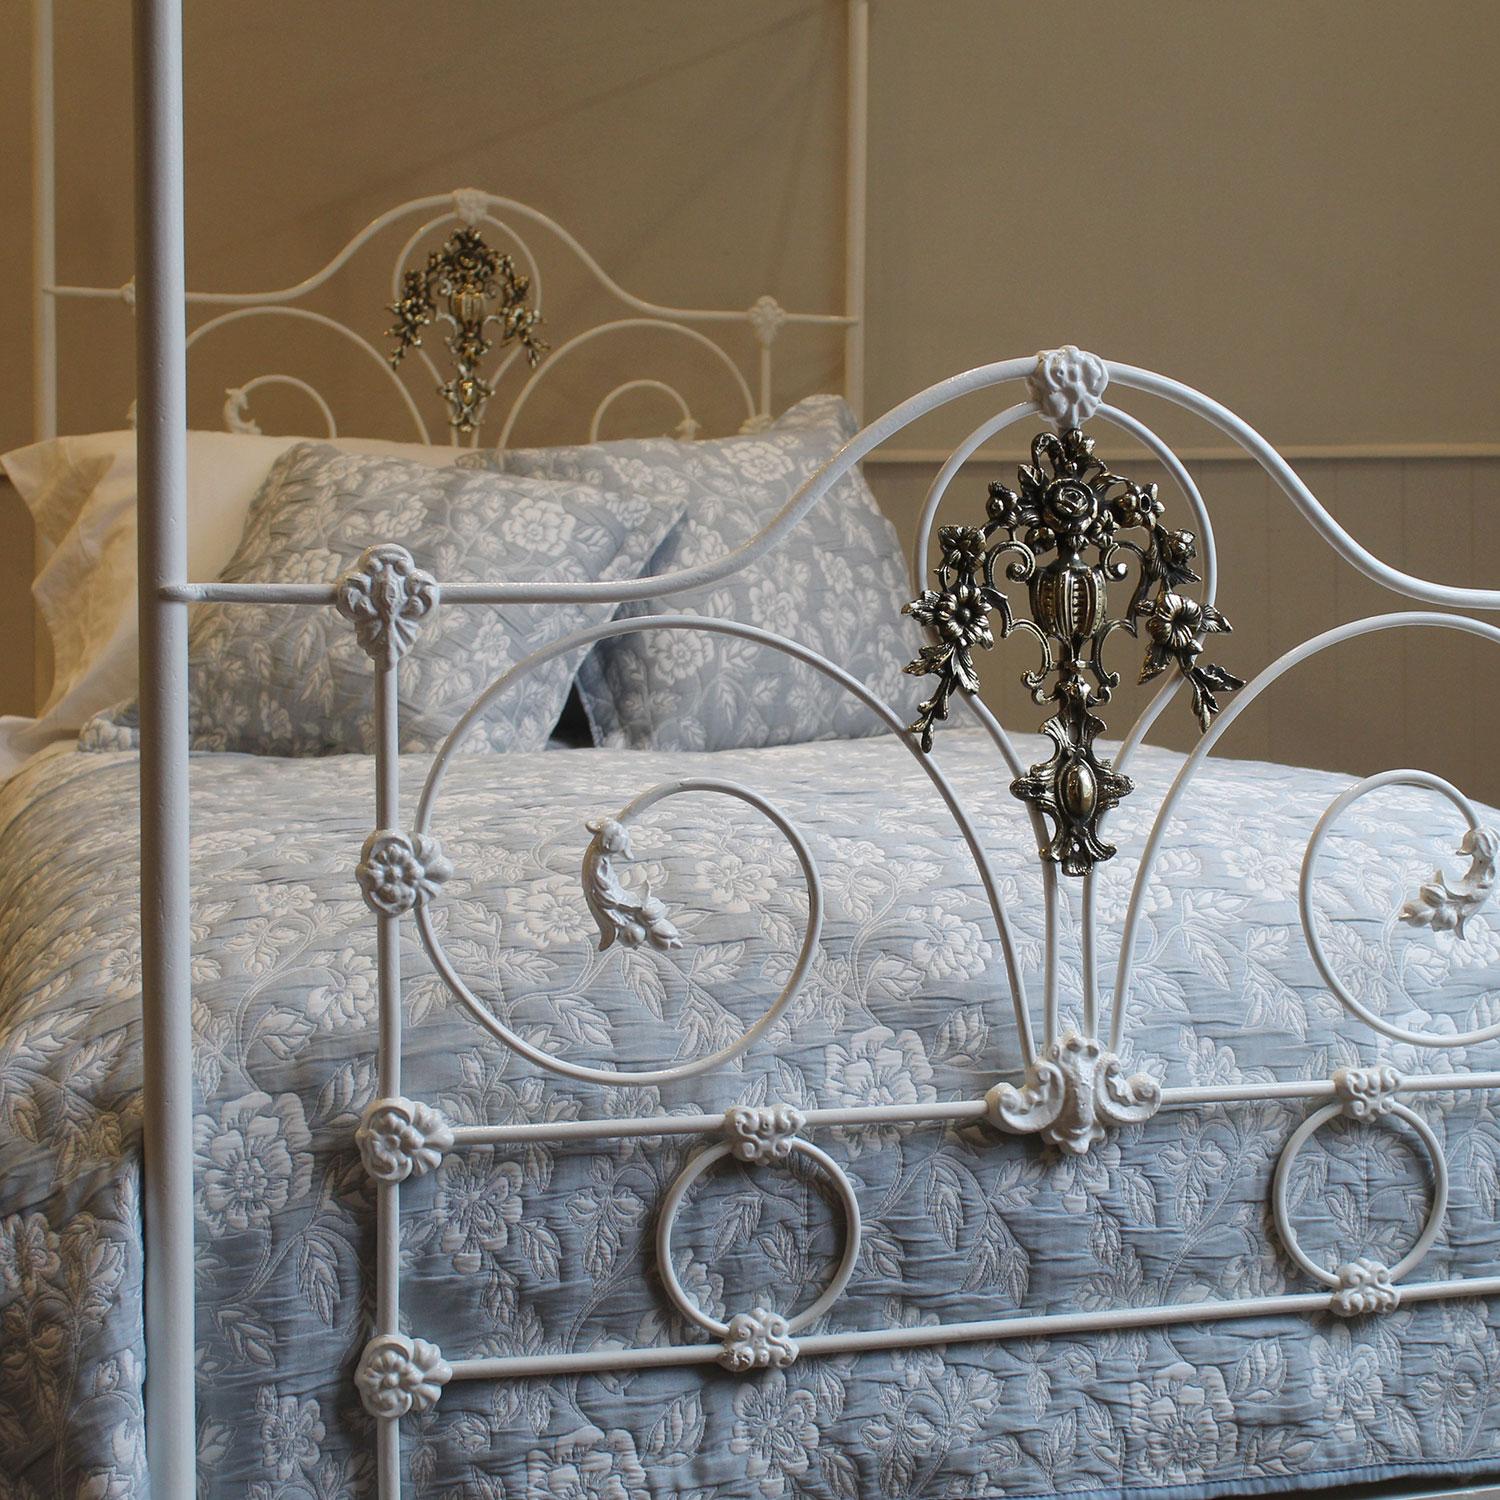 4 poster iron bed